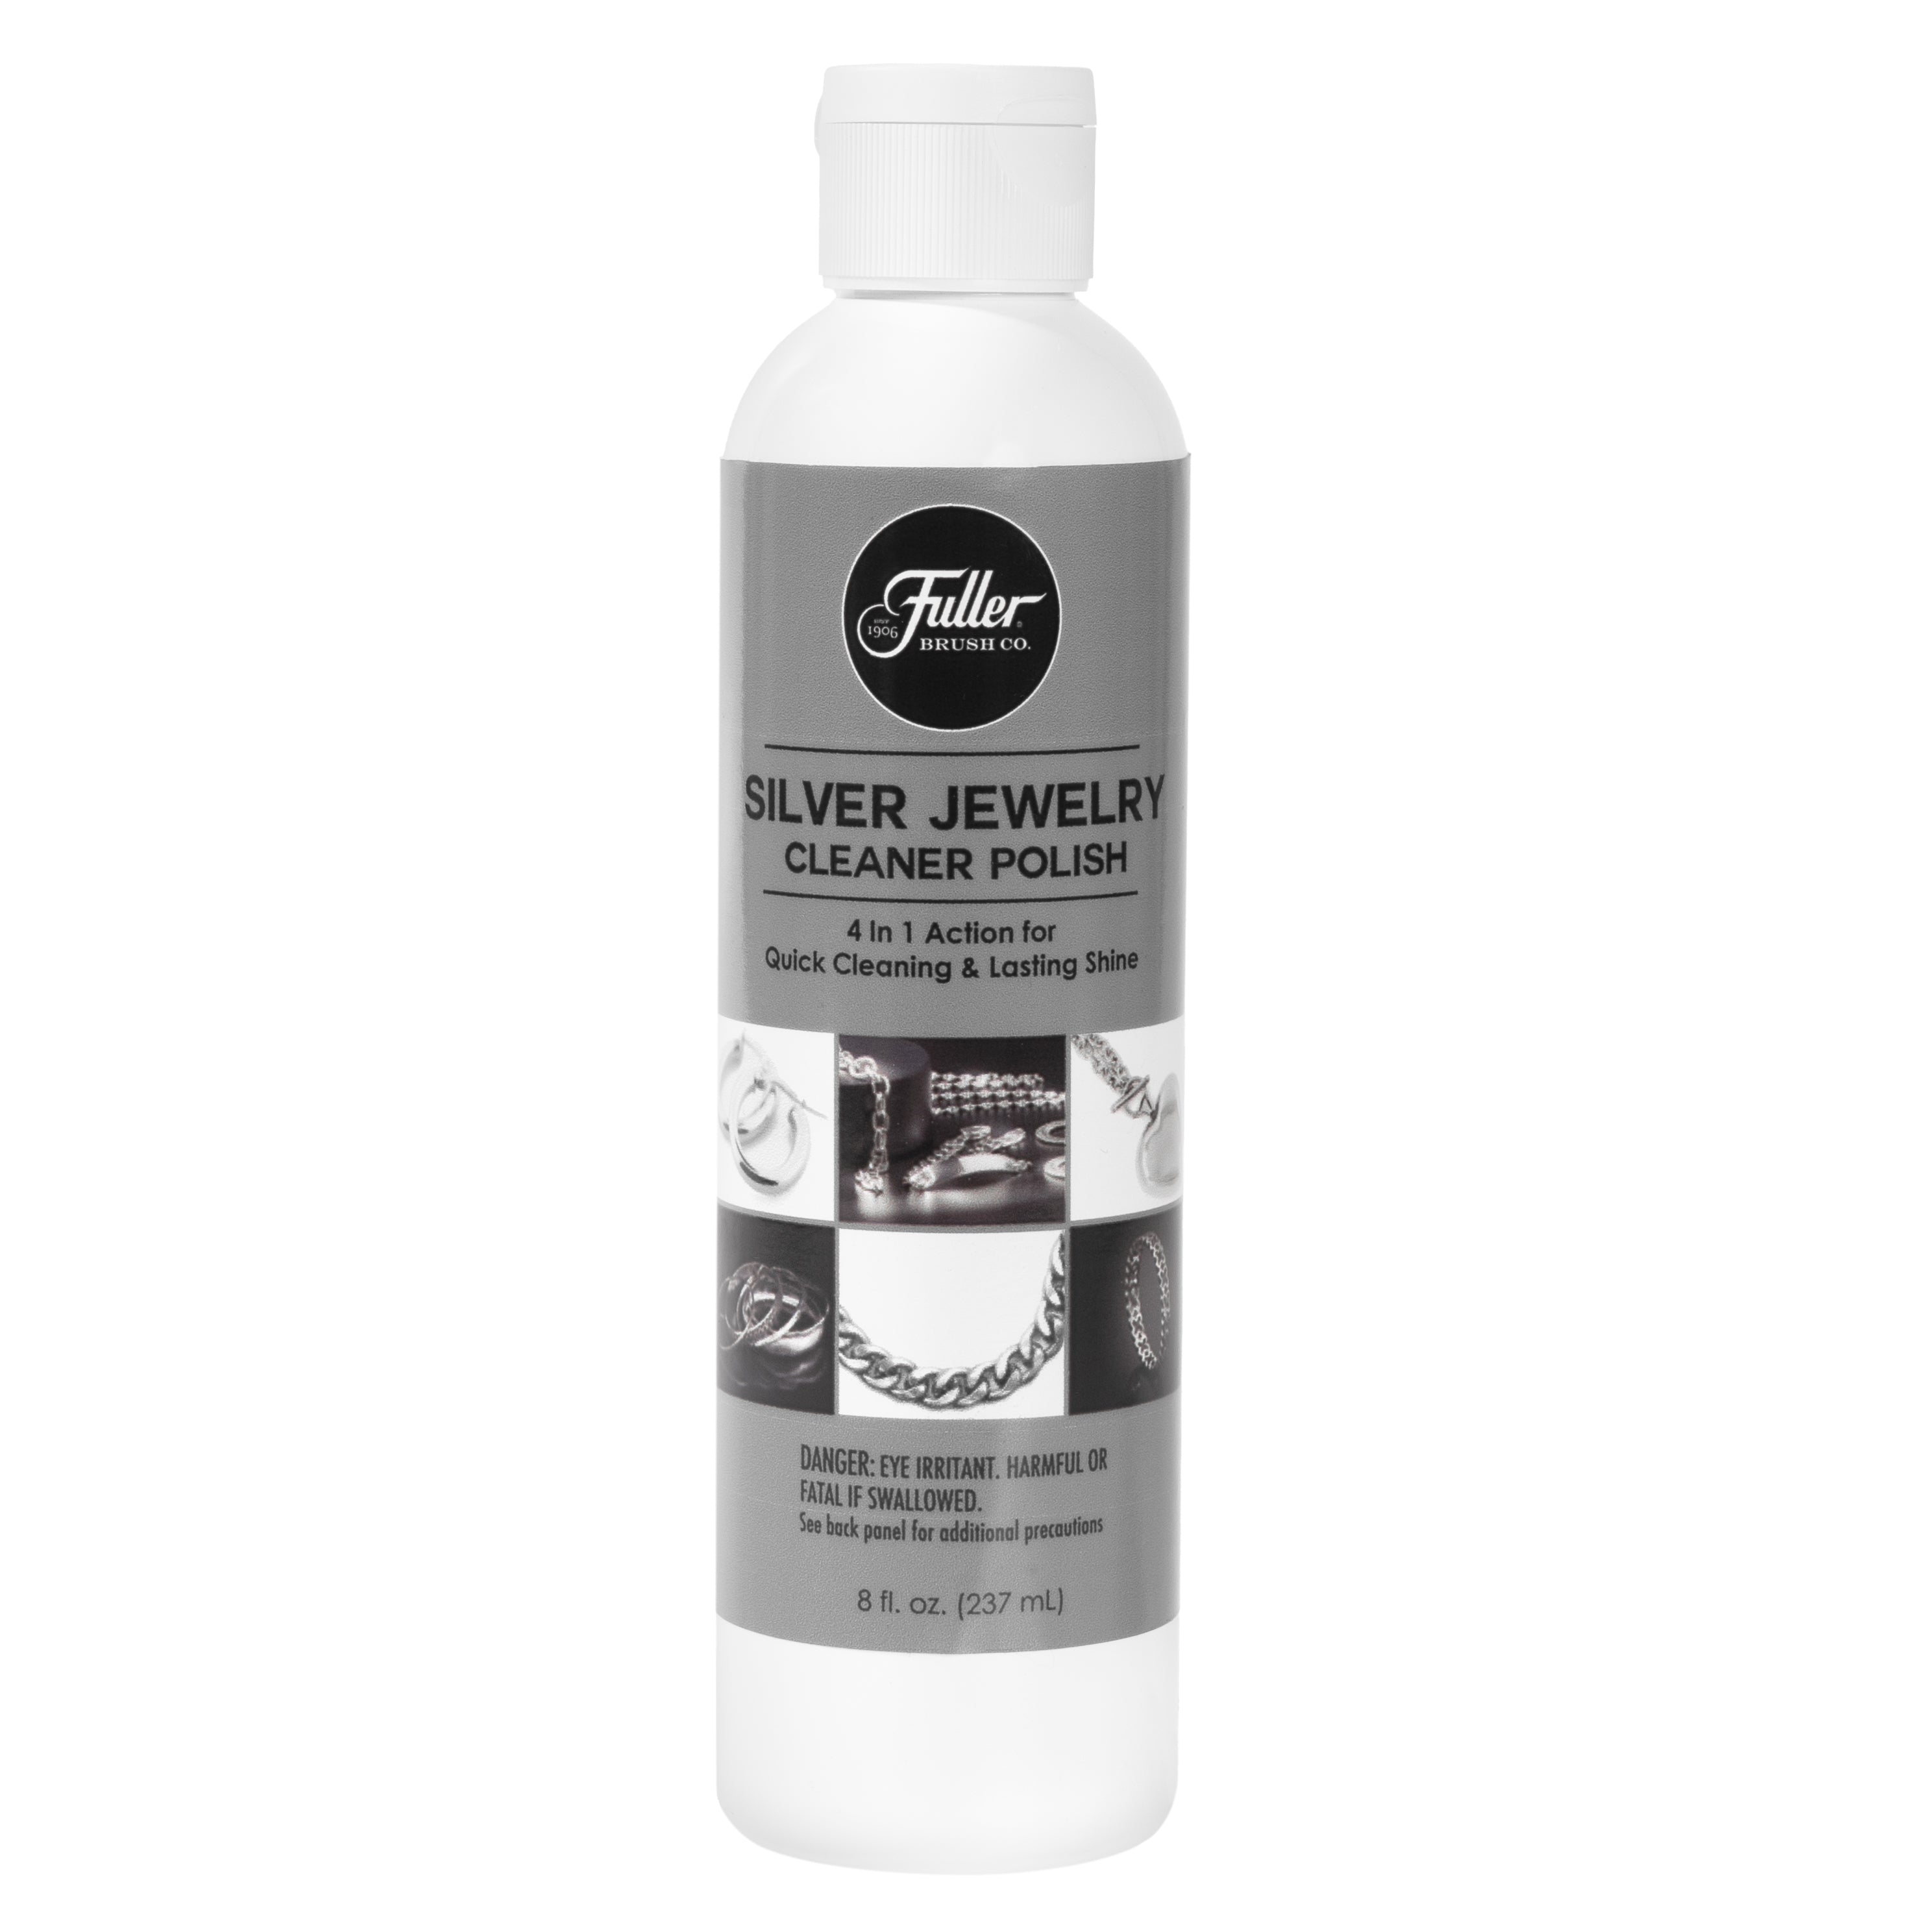 Silver Jewelry Cleaner Polish